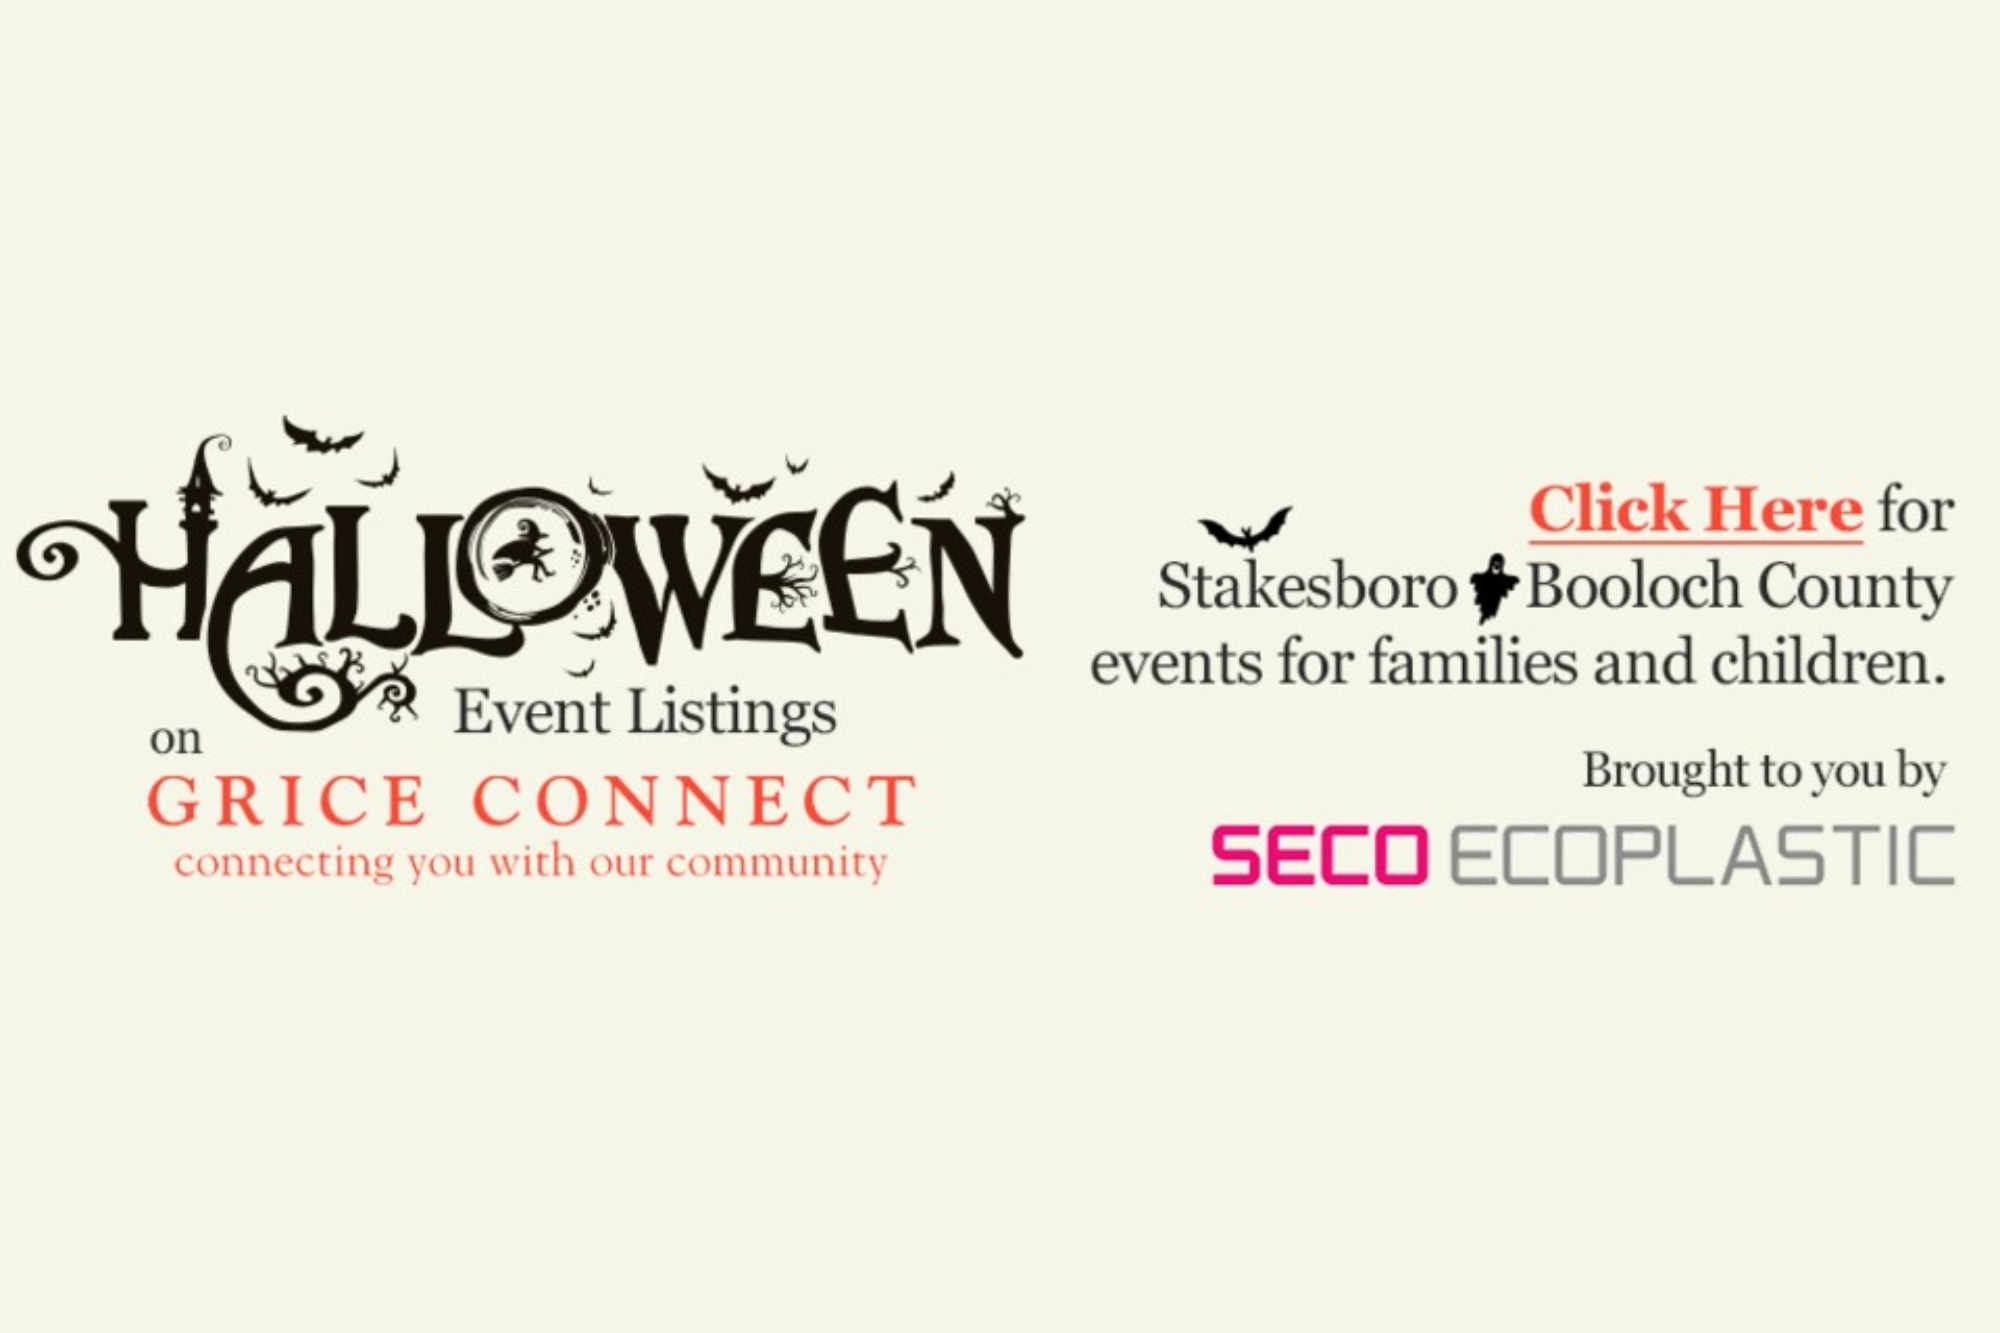 We have some cool events in October! Which ones are you excited for?